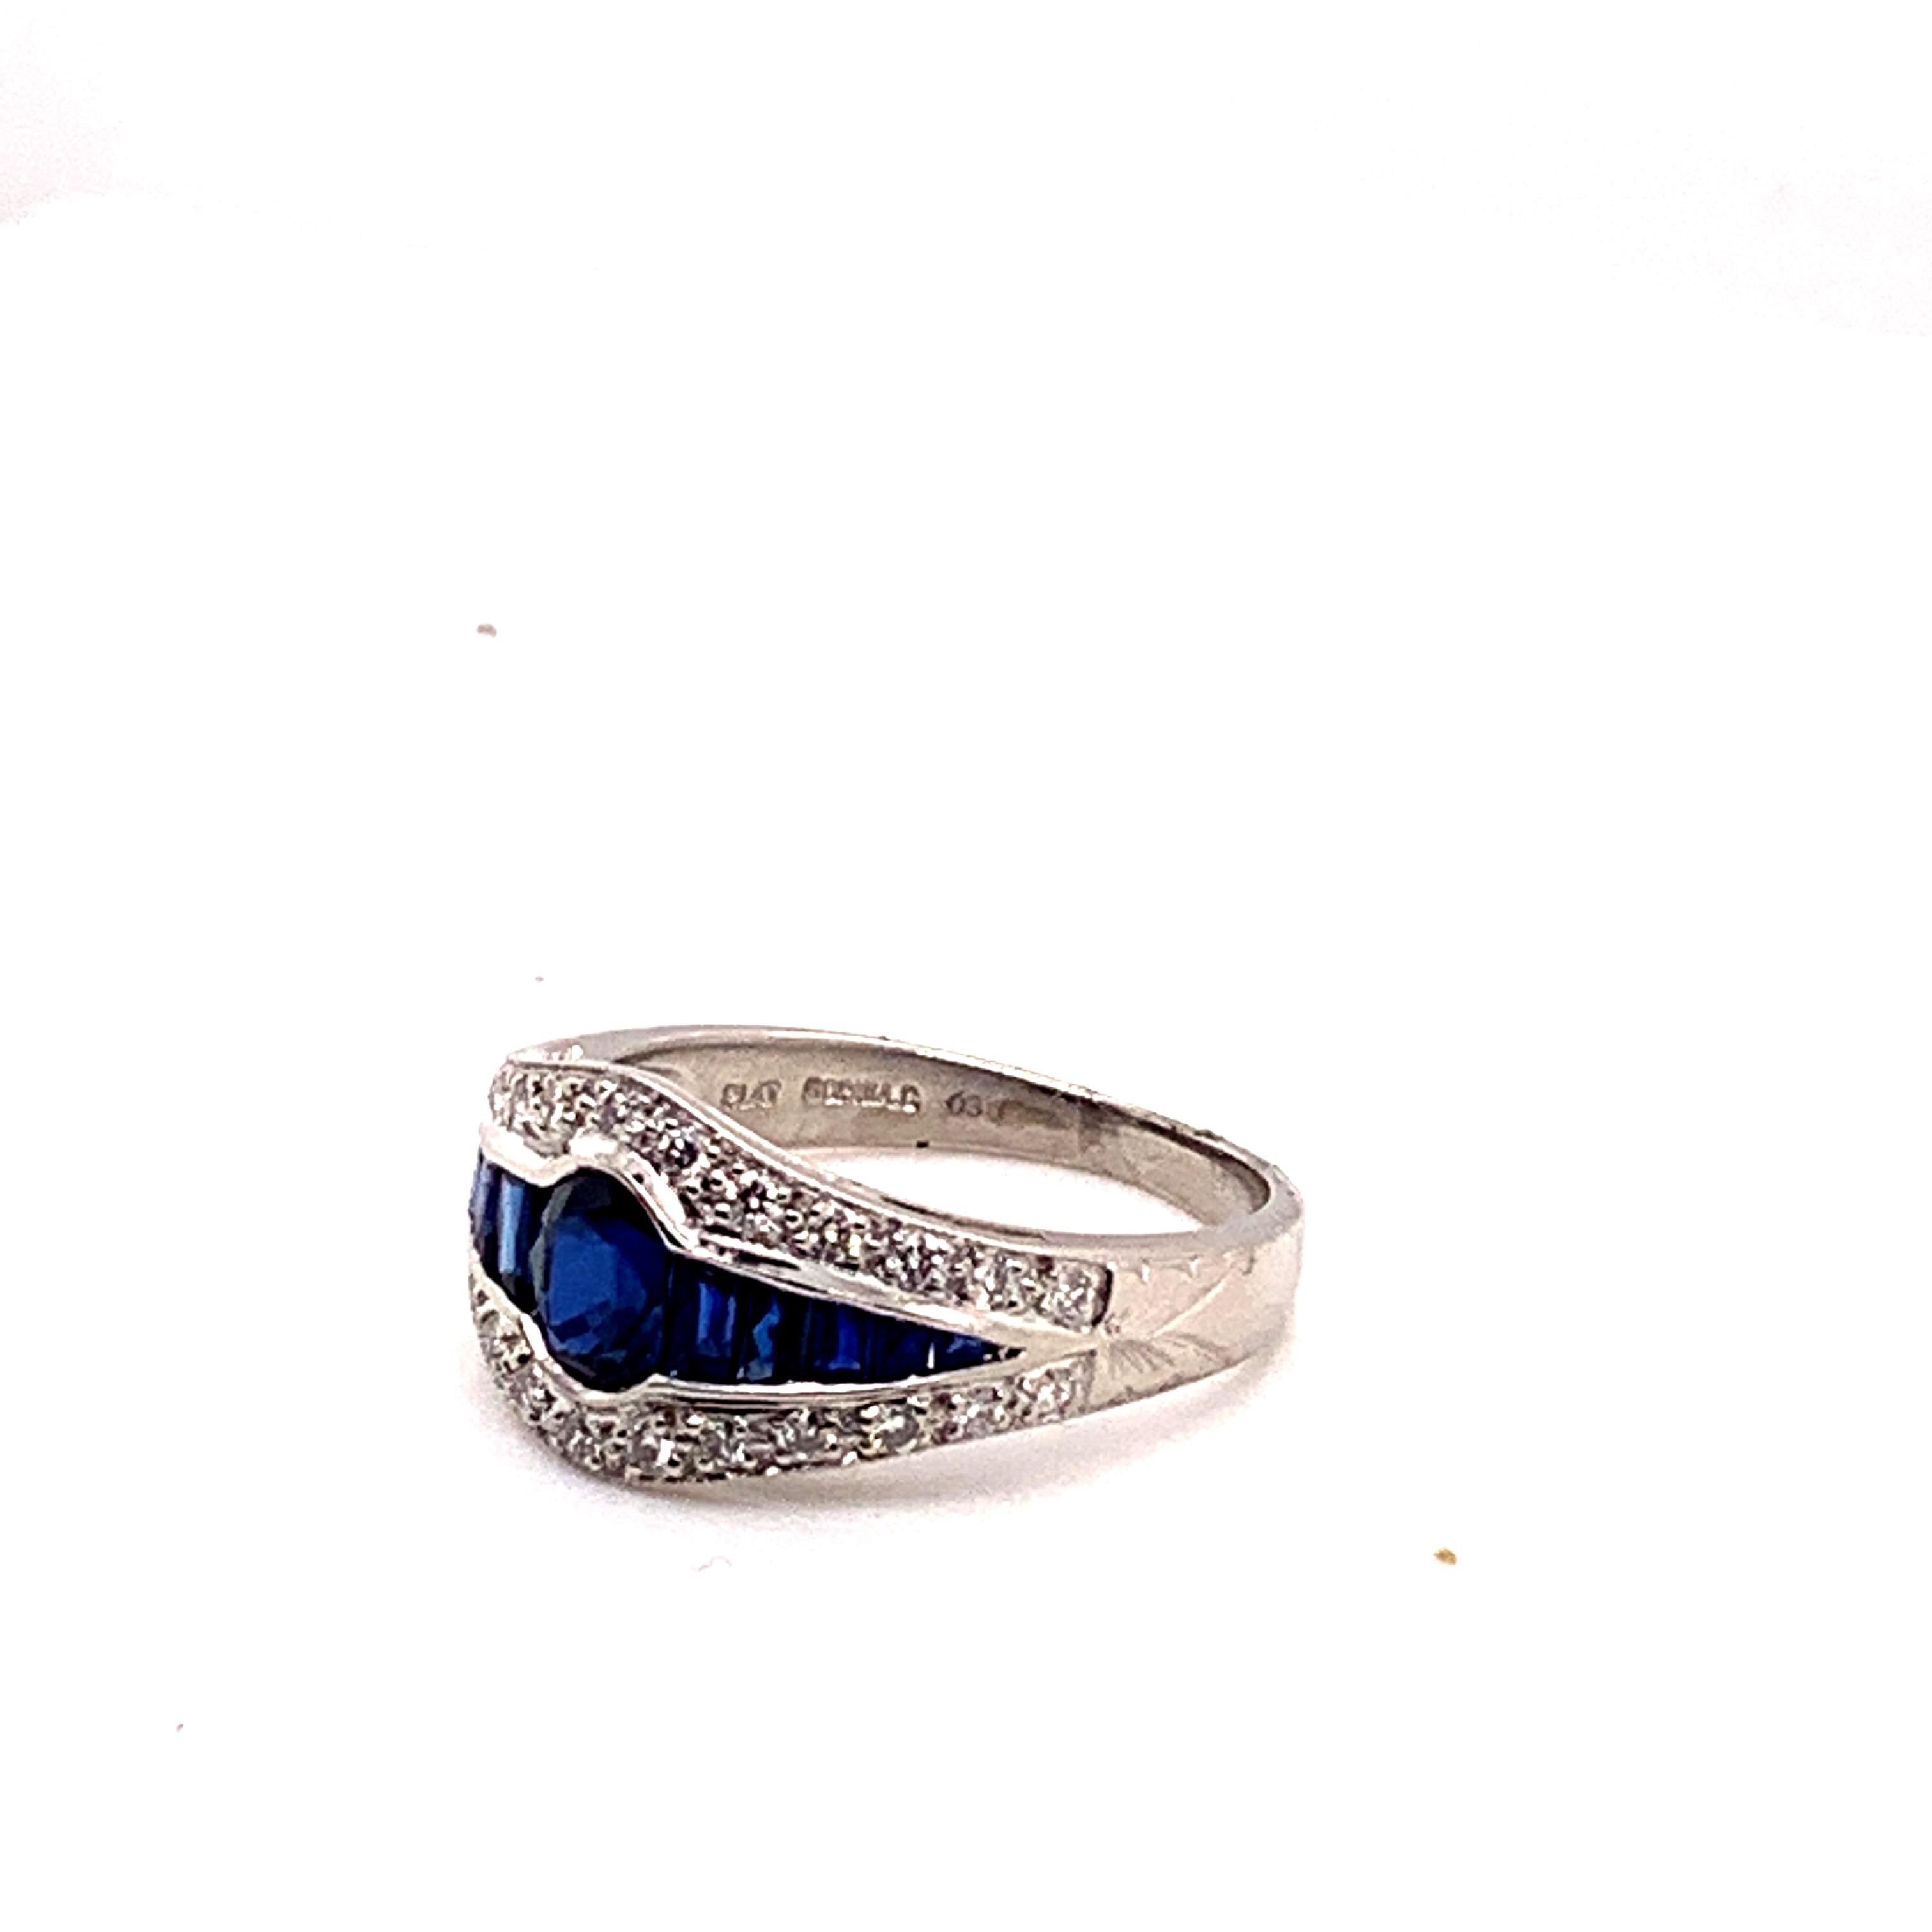 Sophia D Art Deco inspired ring with 1.37 carat weight of blue sapphire accented with small diamonds weighing 0.28 carats. 

Sophia D by Joseph Dardashti LTD has been known worldwide for 35 years and are inspired by classic Art Deco design that